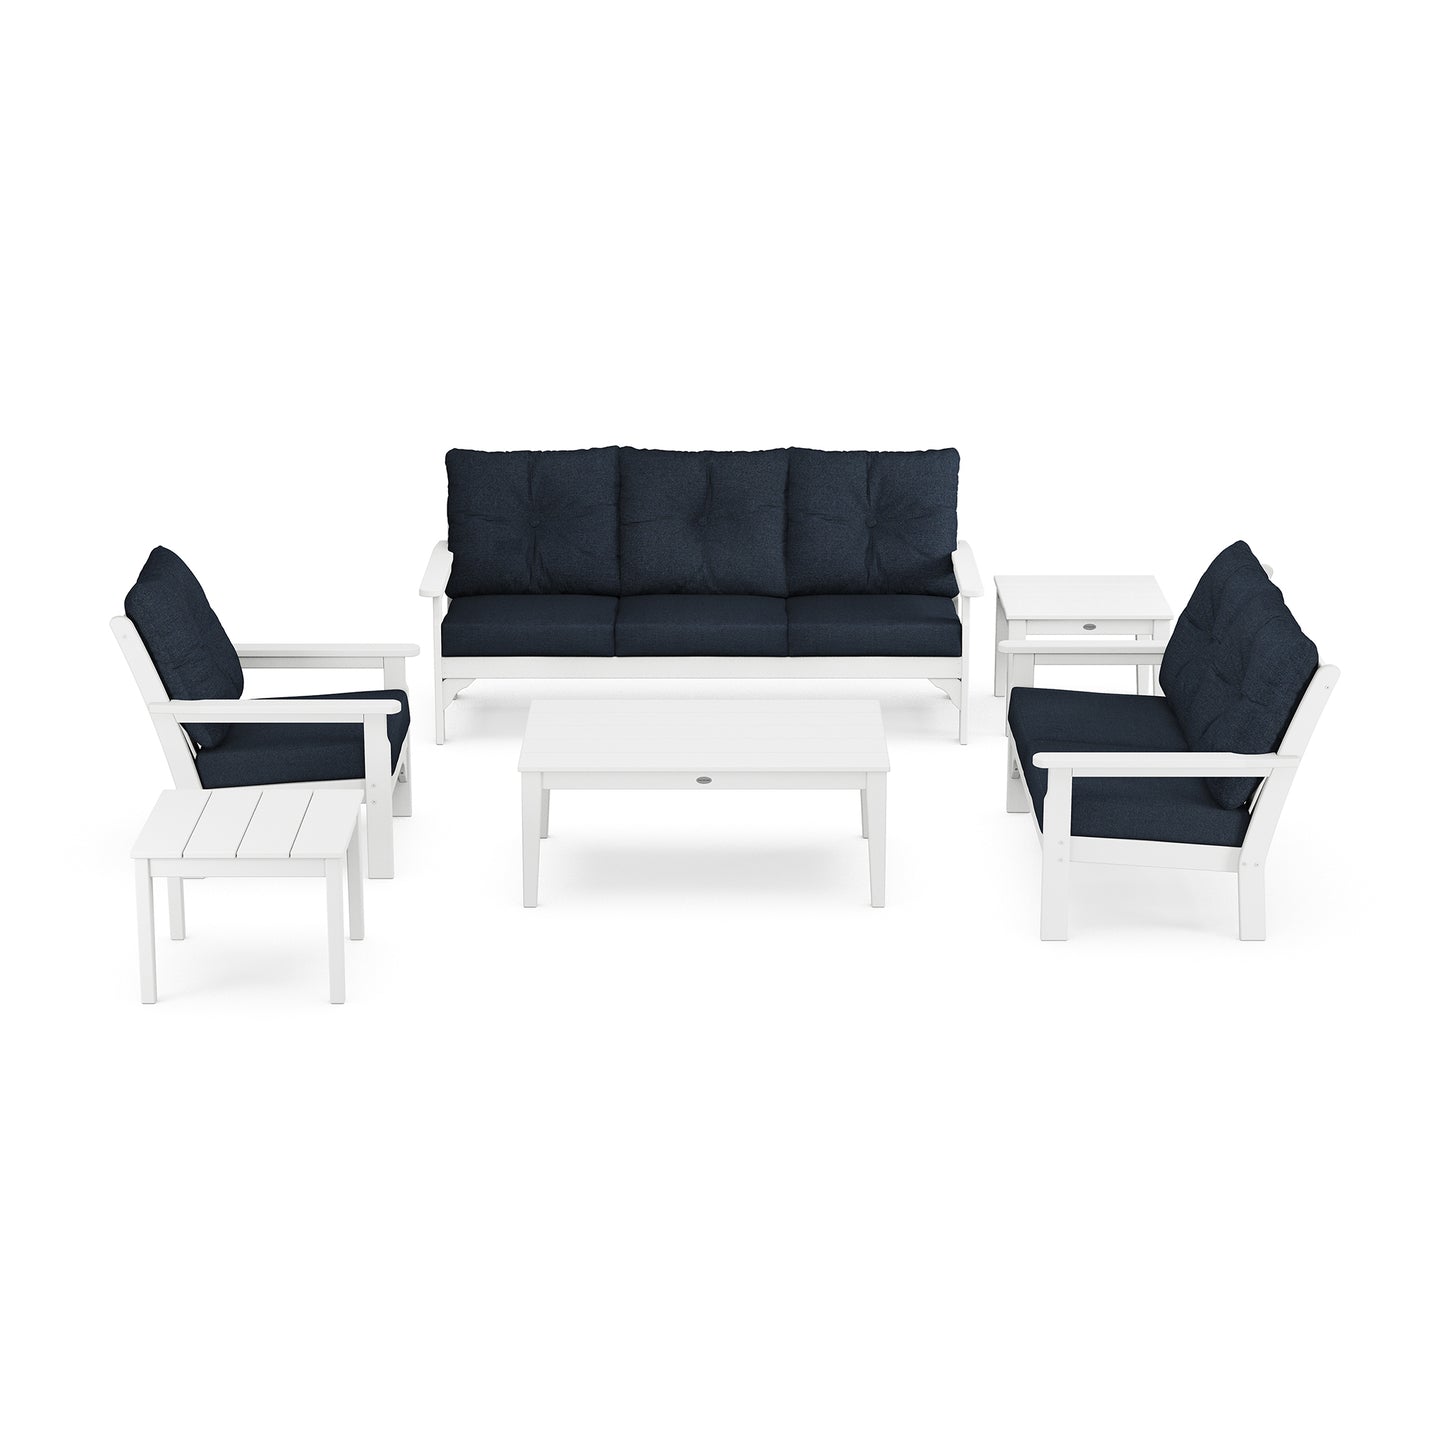 Modern outdoor luxury POLYWOOD Vineyard 6-Piece Deep Seating Set on a white background, including a sofa, two chairs with navy cushions, a coffee table, and a side table, all in coordinated white frames from the POLYWOOD Deep Se